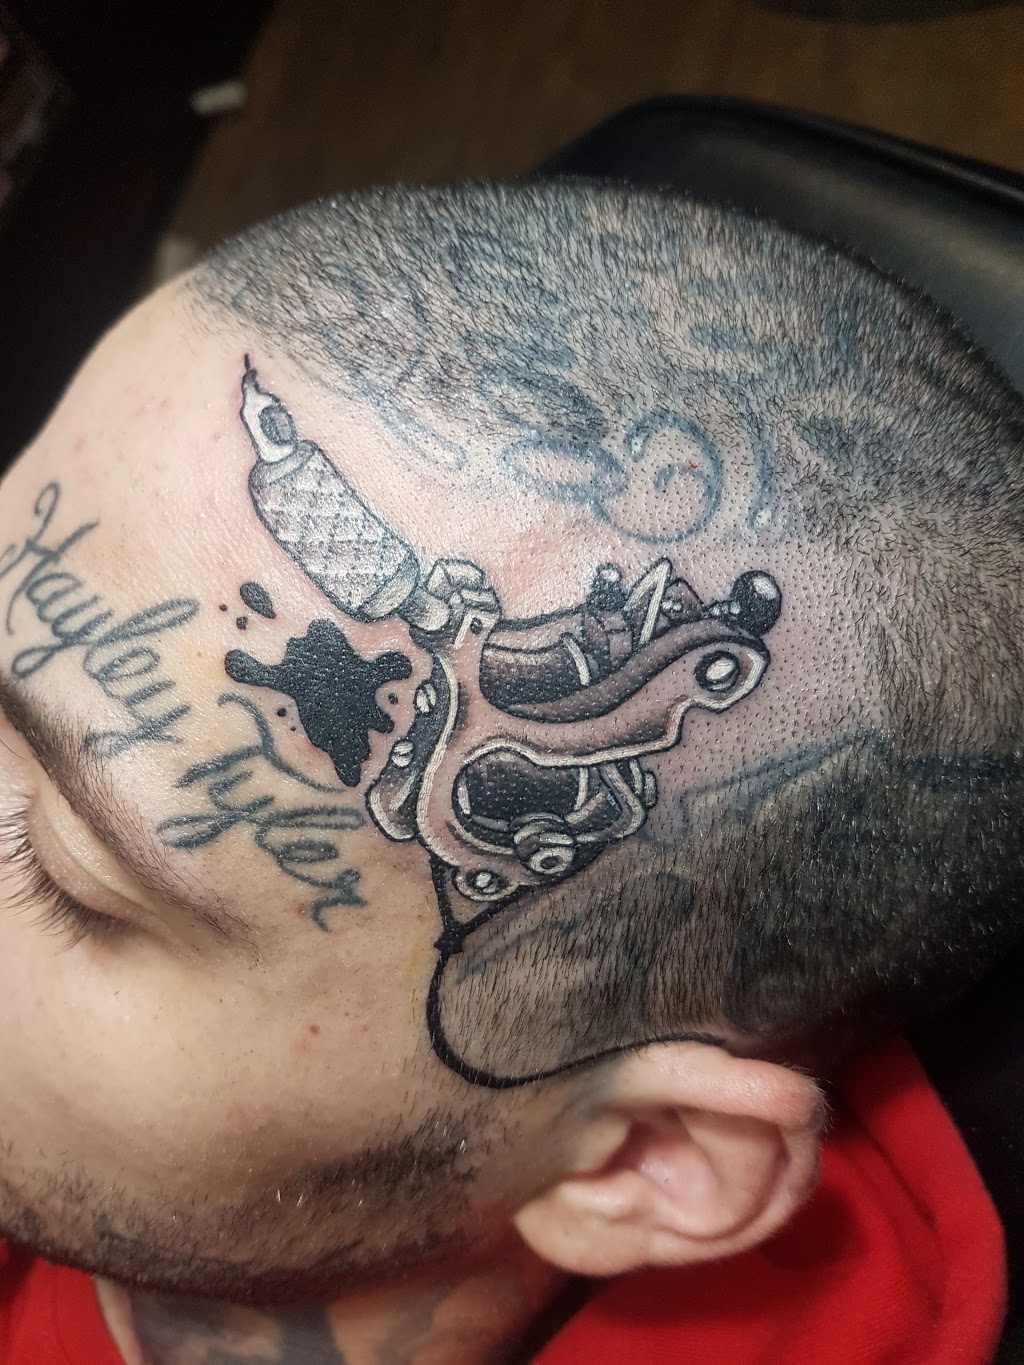 DEAD MIND TATTOOS (Appointment Only Studio) | store | 10 Vantage Point Blvd, Doreen VIC 3754, Australia | 0401047770 OR +61 401 047 770